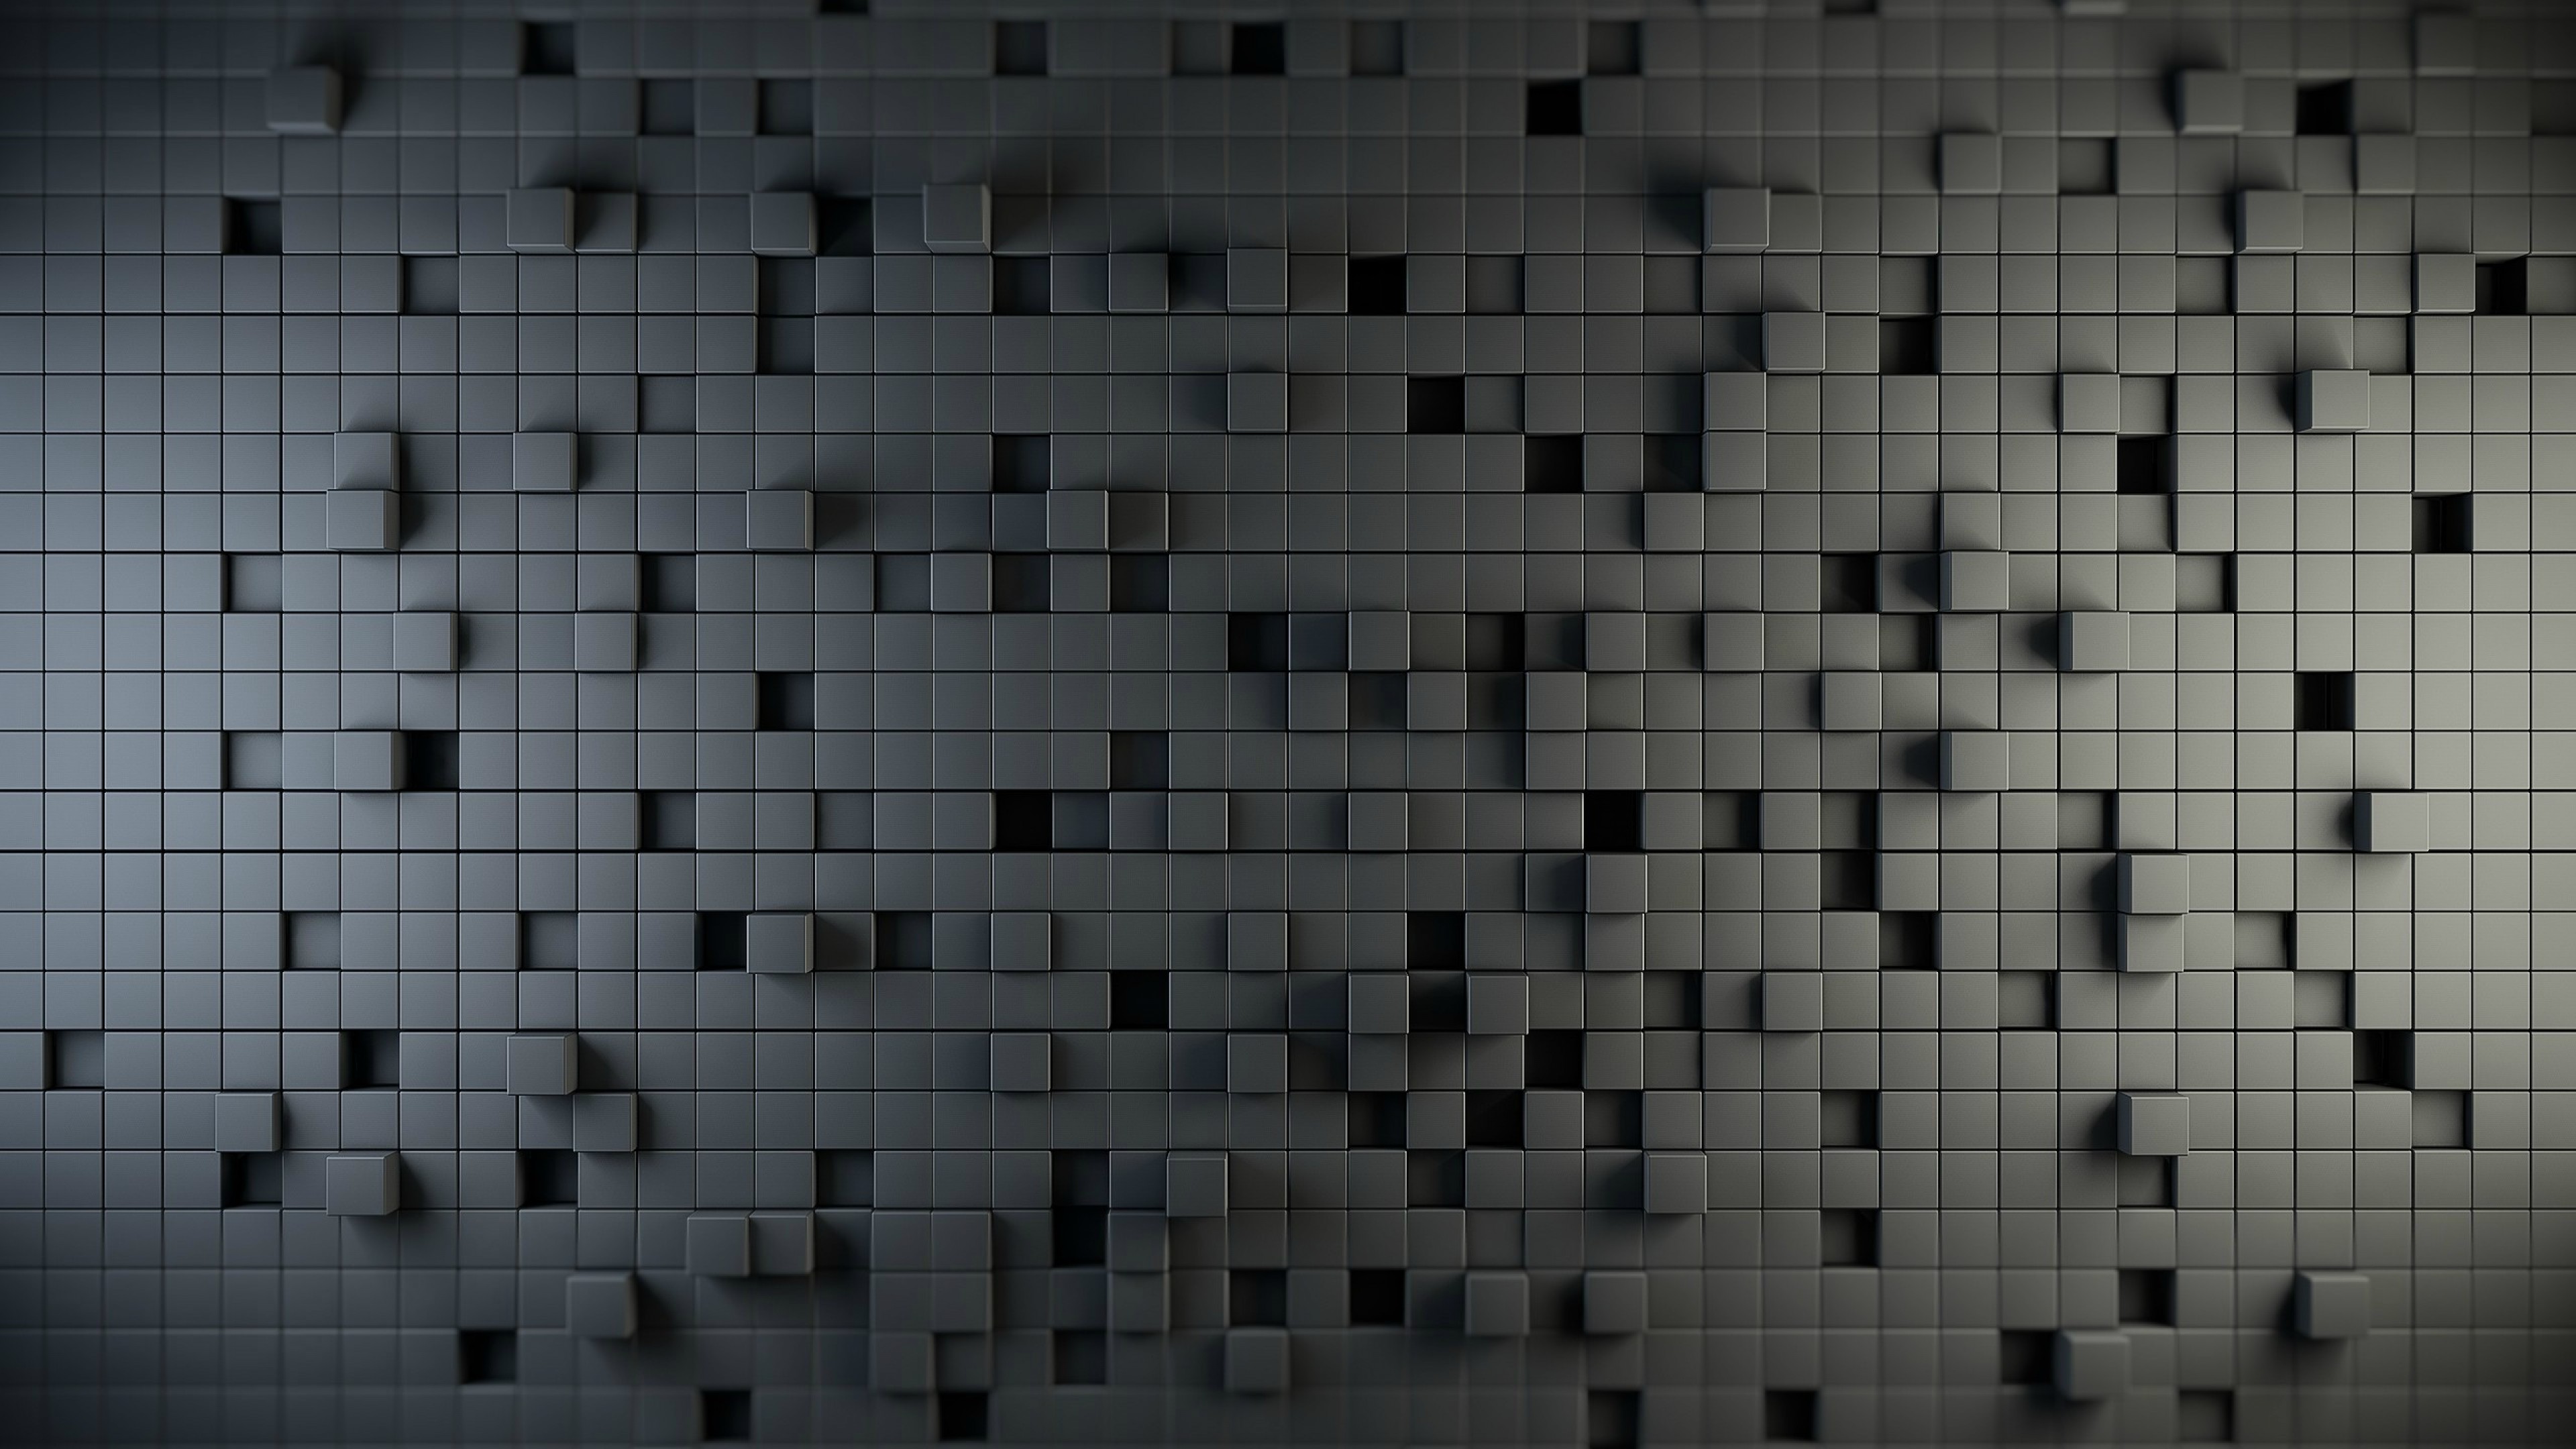 3D Abstract Grey Square Hd Wallpaper for Desktop and Mobiles 4K Ultra